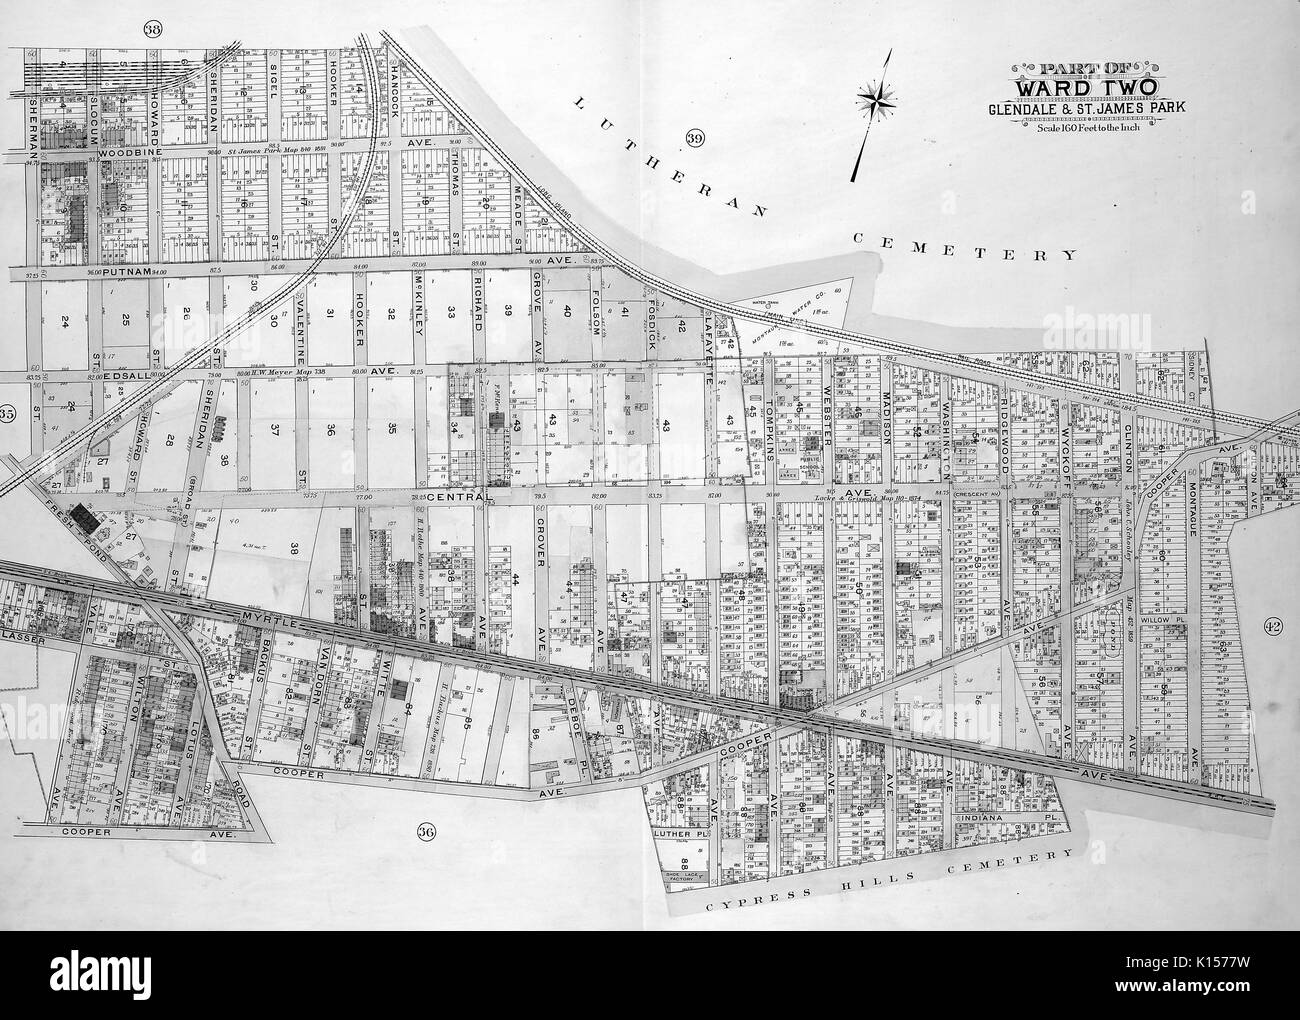 Map of Ward 2 in Queens, New York, with original caption reading 'Map bounded by Sherman St, Slocum St, Howard St, Sheridan St, Sigel St, Hooker St, Hancock St, Thomas St, Meade St, Folsom Ave, Fosdick Ave, Tompkins Ave, Webster Ave, Madison Ave, Washington Ave, Including Ridgewood Ave, Wyckoff Ave, Clinton Ave, Cooper Ave, Montague Ave, Fulton Ave, Myrtle Ave, Indiana PL, Luther PL, Yale Ave, Glasser St, Harman Ave, Fresh Pond Road, Edsall Ave, Putnam Ave, Woodbine Ave', Washington, DC, 1742. Stock Photo